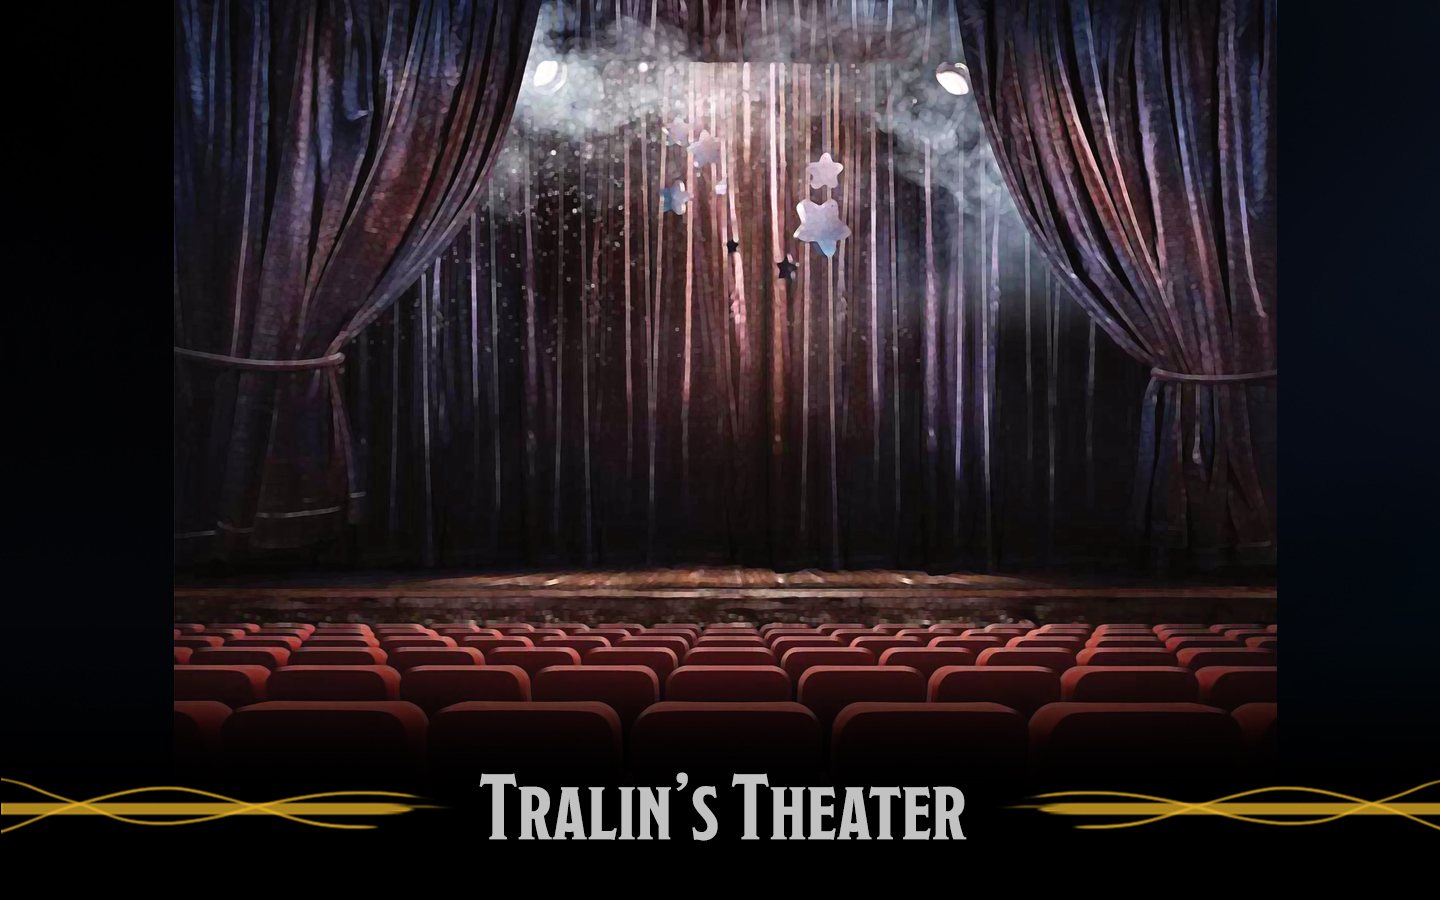 Tralin’s Theater – Mystery TTRPG and DnD Adventure Location